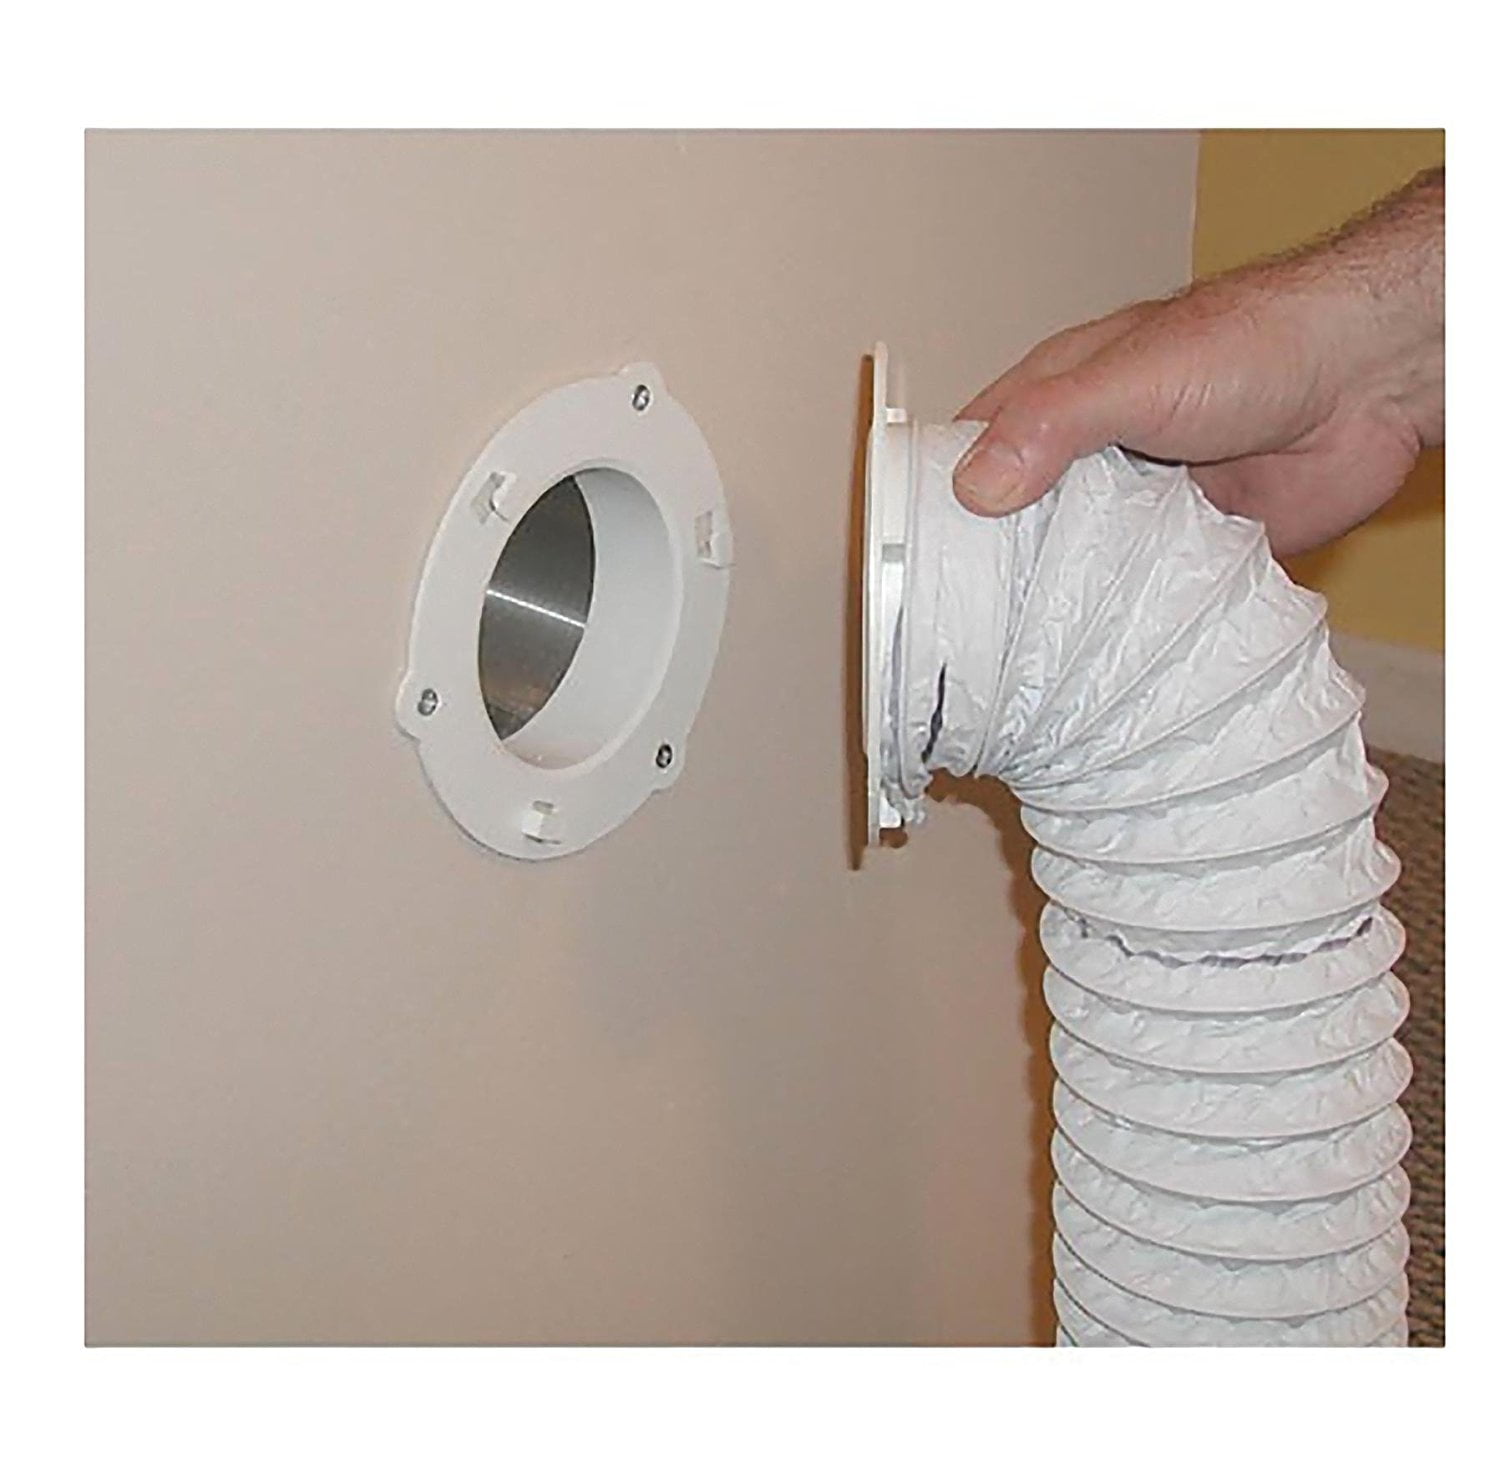 Dryer Vent 6 For 4 Tubes White Connect And Disconnect The Vent Pipe In Seconds By Dryer Dock Walmart Com